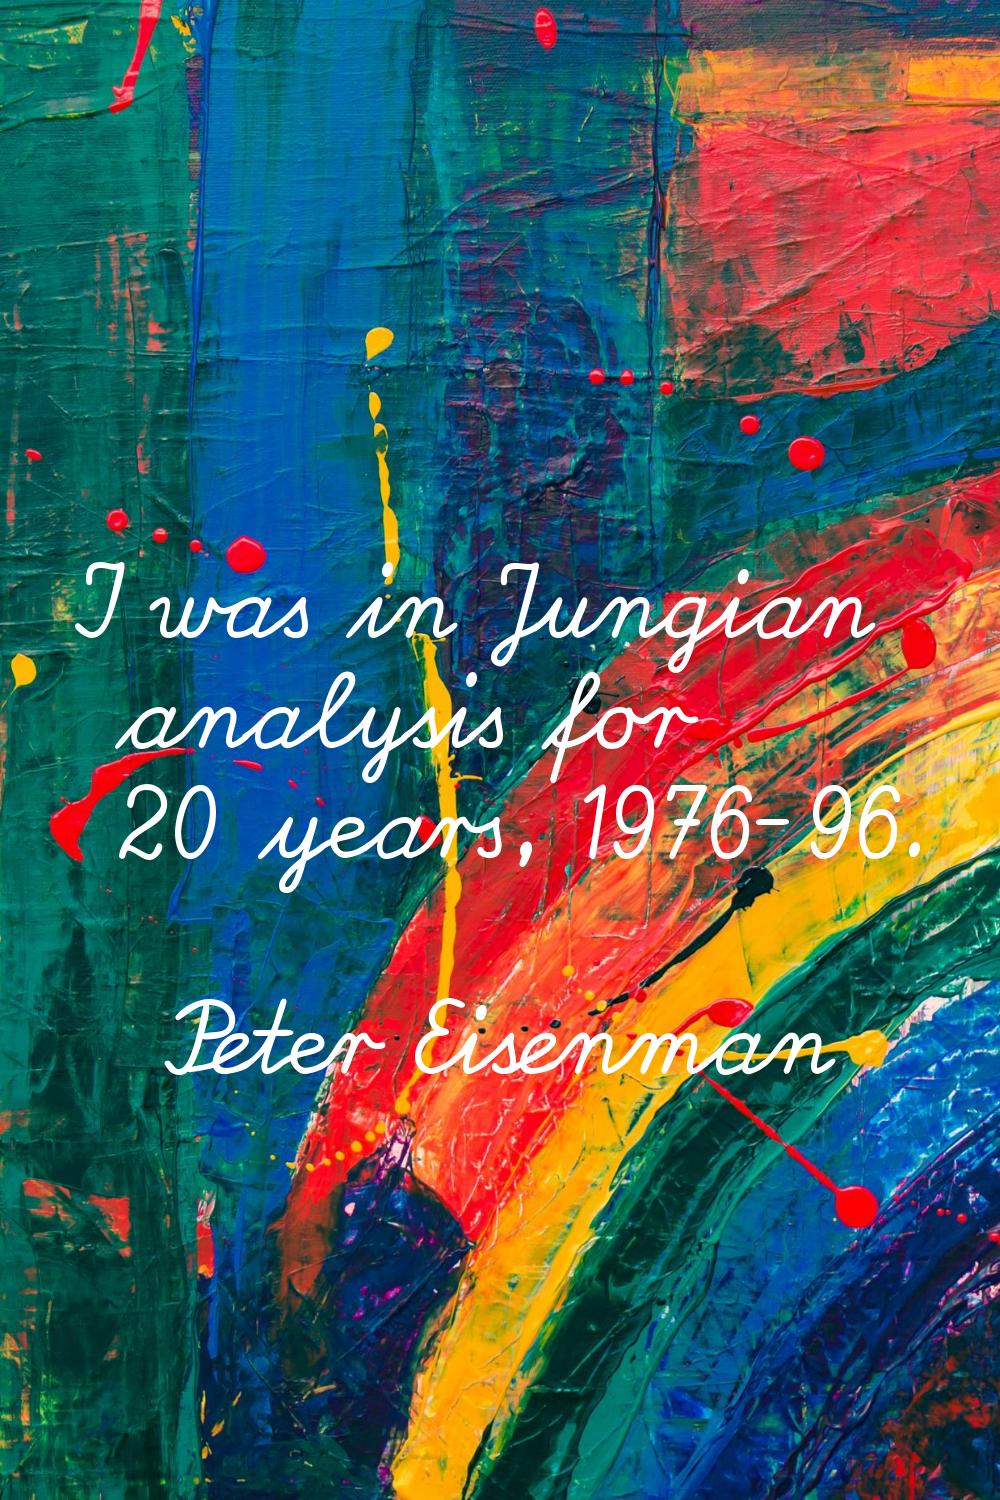 I was in Jungian analysis for 20 years, 1976-96.